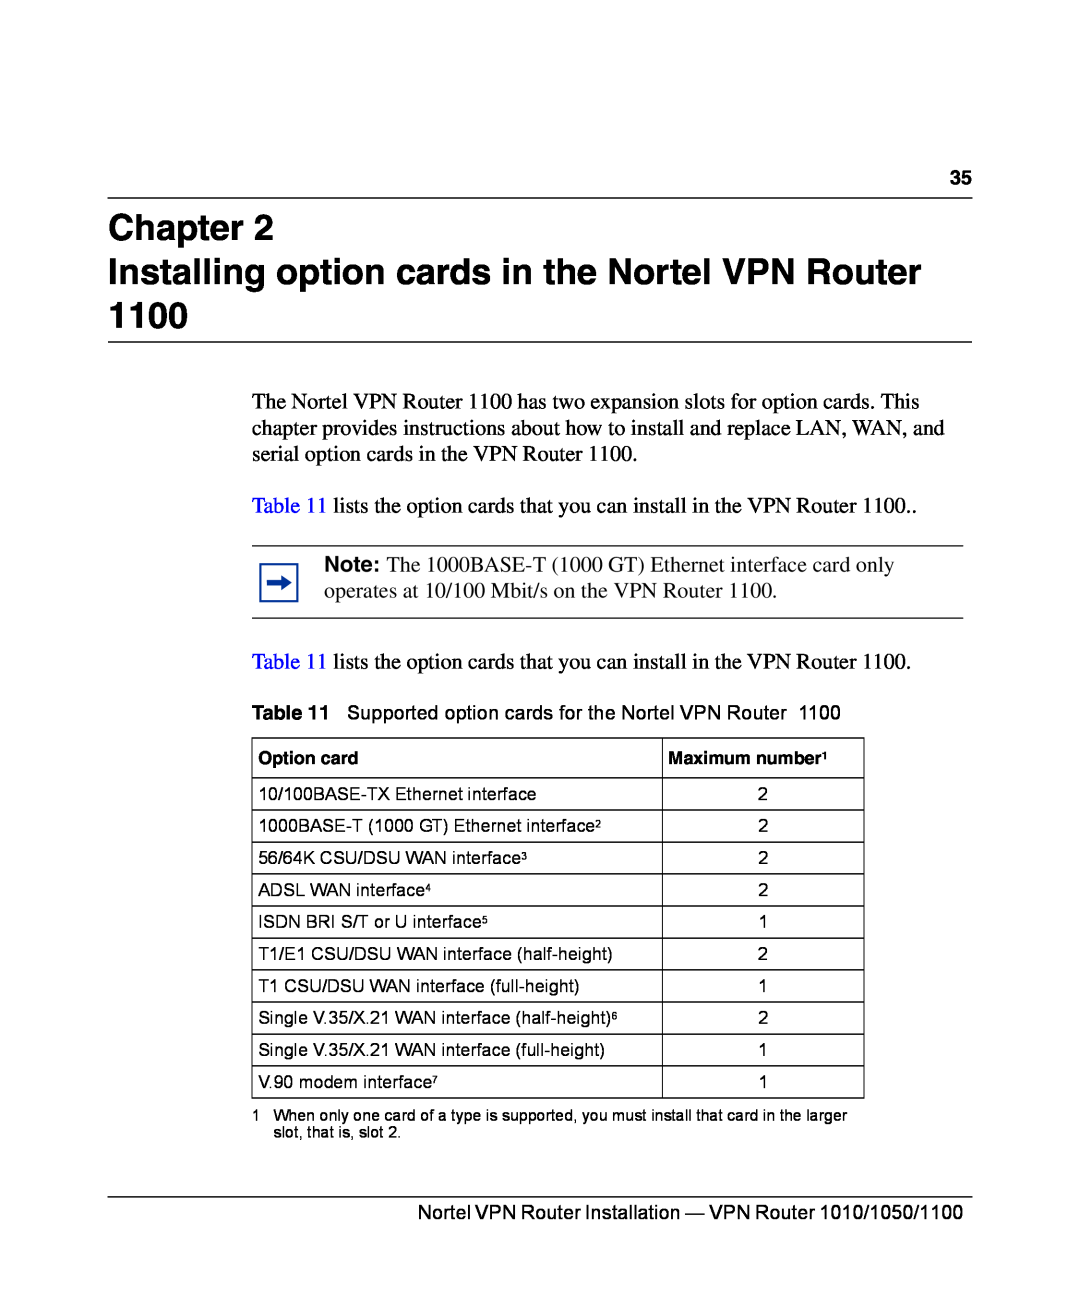 Nortel Networks 1010, 1050, 1100 manual Chapter Installing option cards in the Nortel VPN Router, Option card, Maximum number 